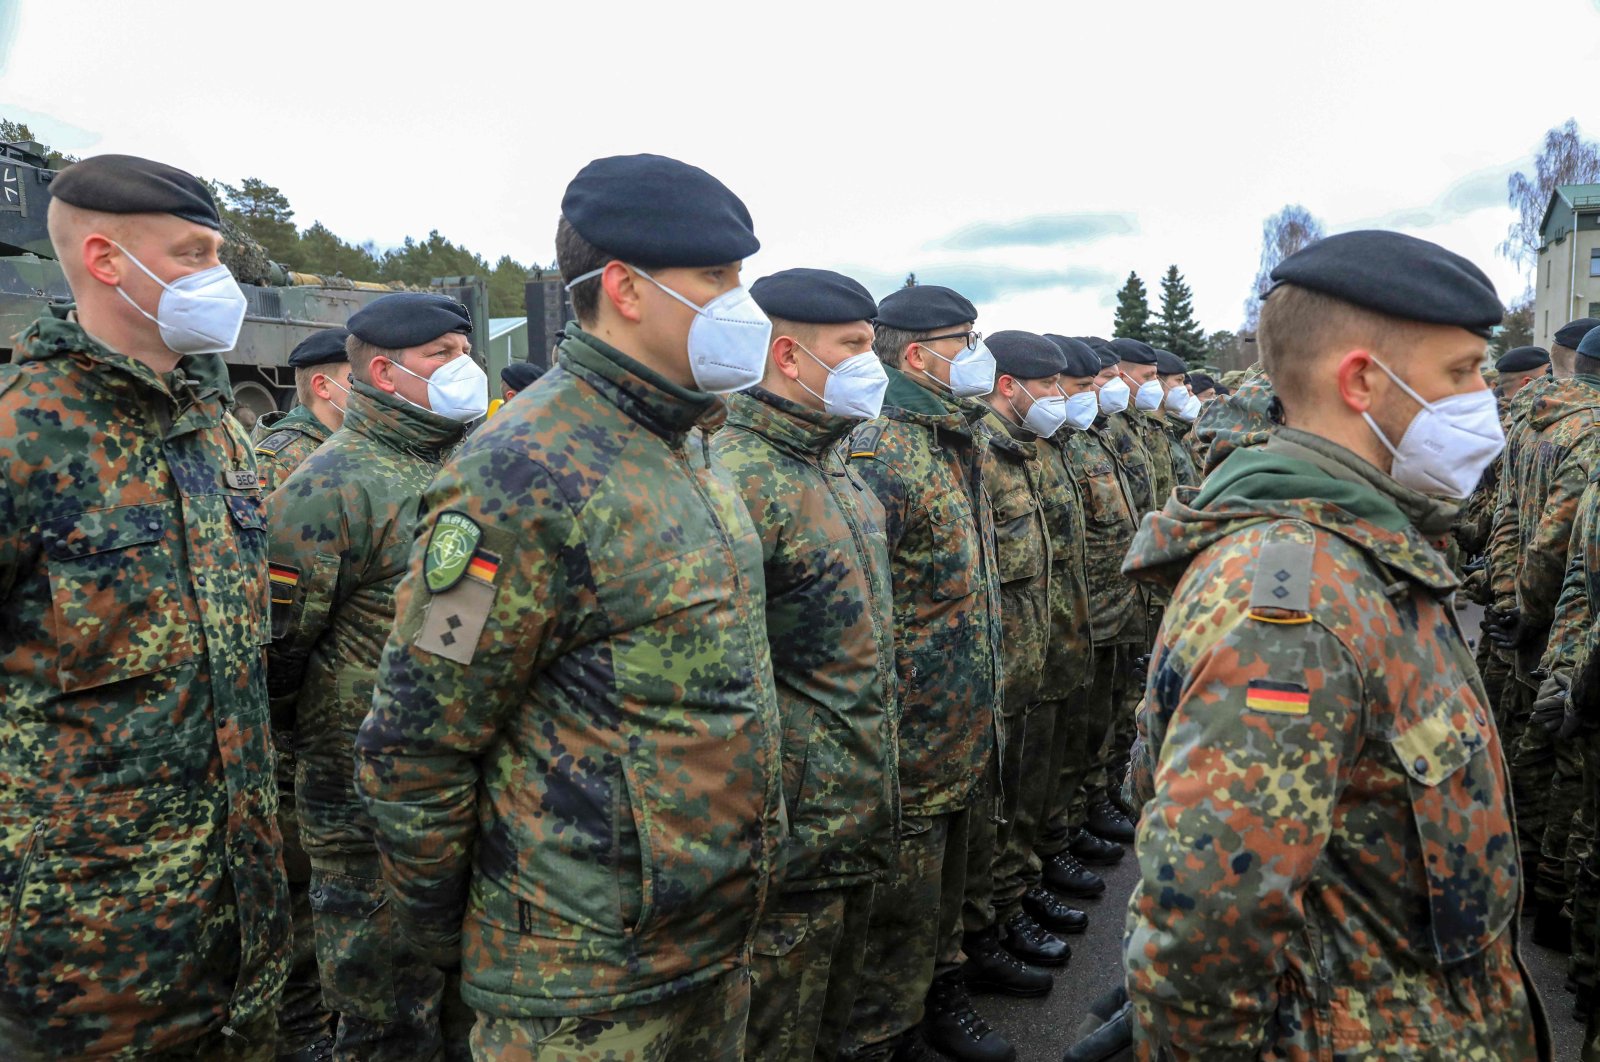 Soldiers of the German armed forces Bundeswehr take part in a ceremony during the visit of the German Defense Minister at the leadership of the NATO&#039;s Enhanced Forward Presence (EFP) battlegroup in Rukla, Lithuania, Feb.  22, 2022. (AFP Photo)